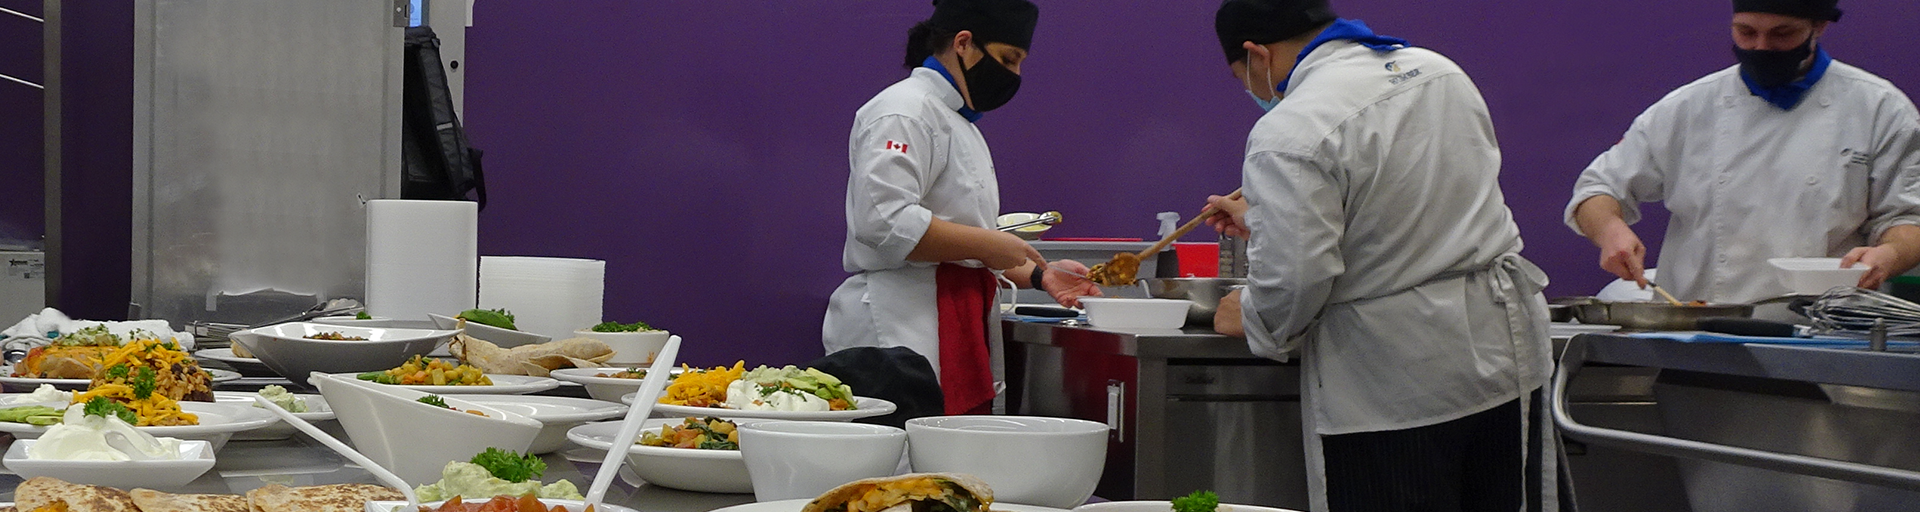 Students cooking and plating food